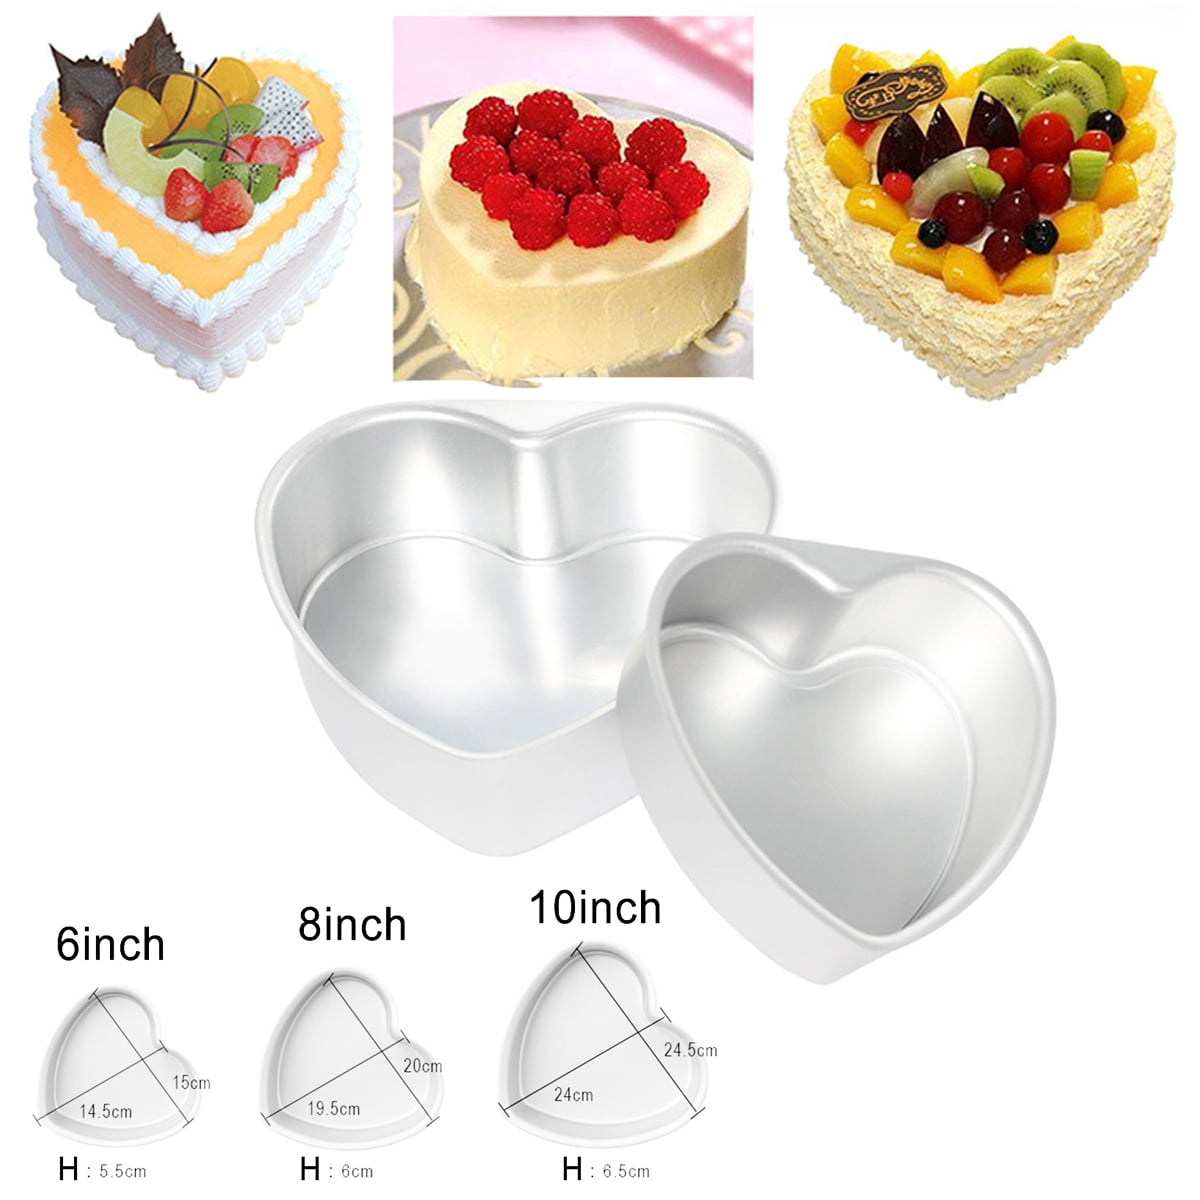 Woven Heart Silicone Mold 3D Love Heart DIY Mousse Cake Chocolate Fondant  Candle Handmade Mold Valentine Decoration Baking Tools